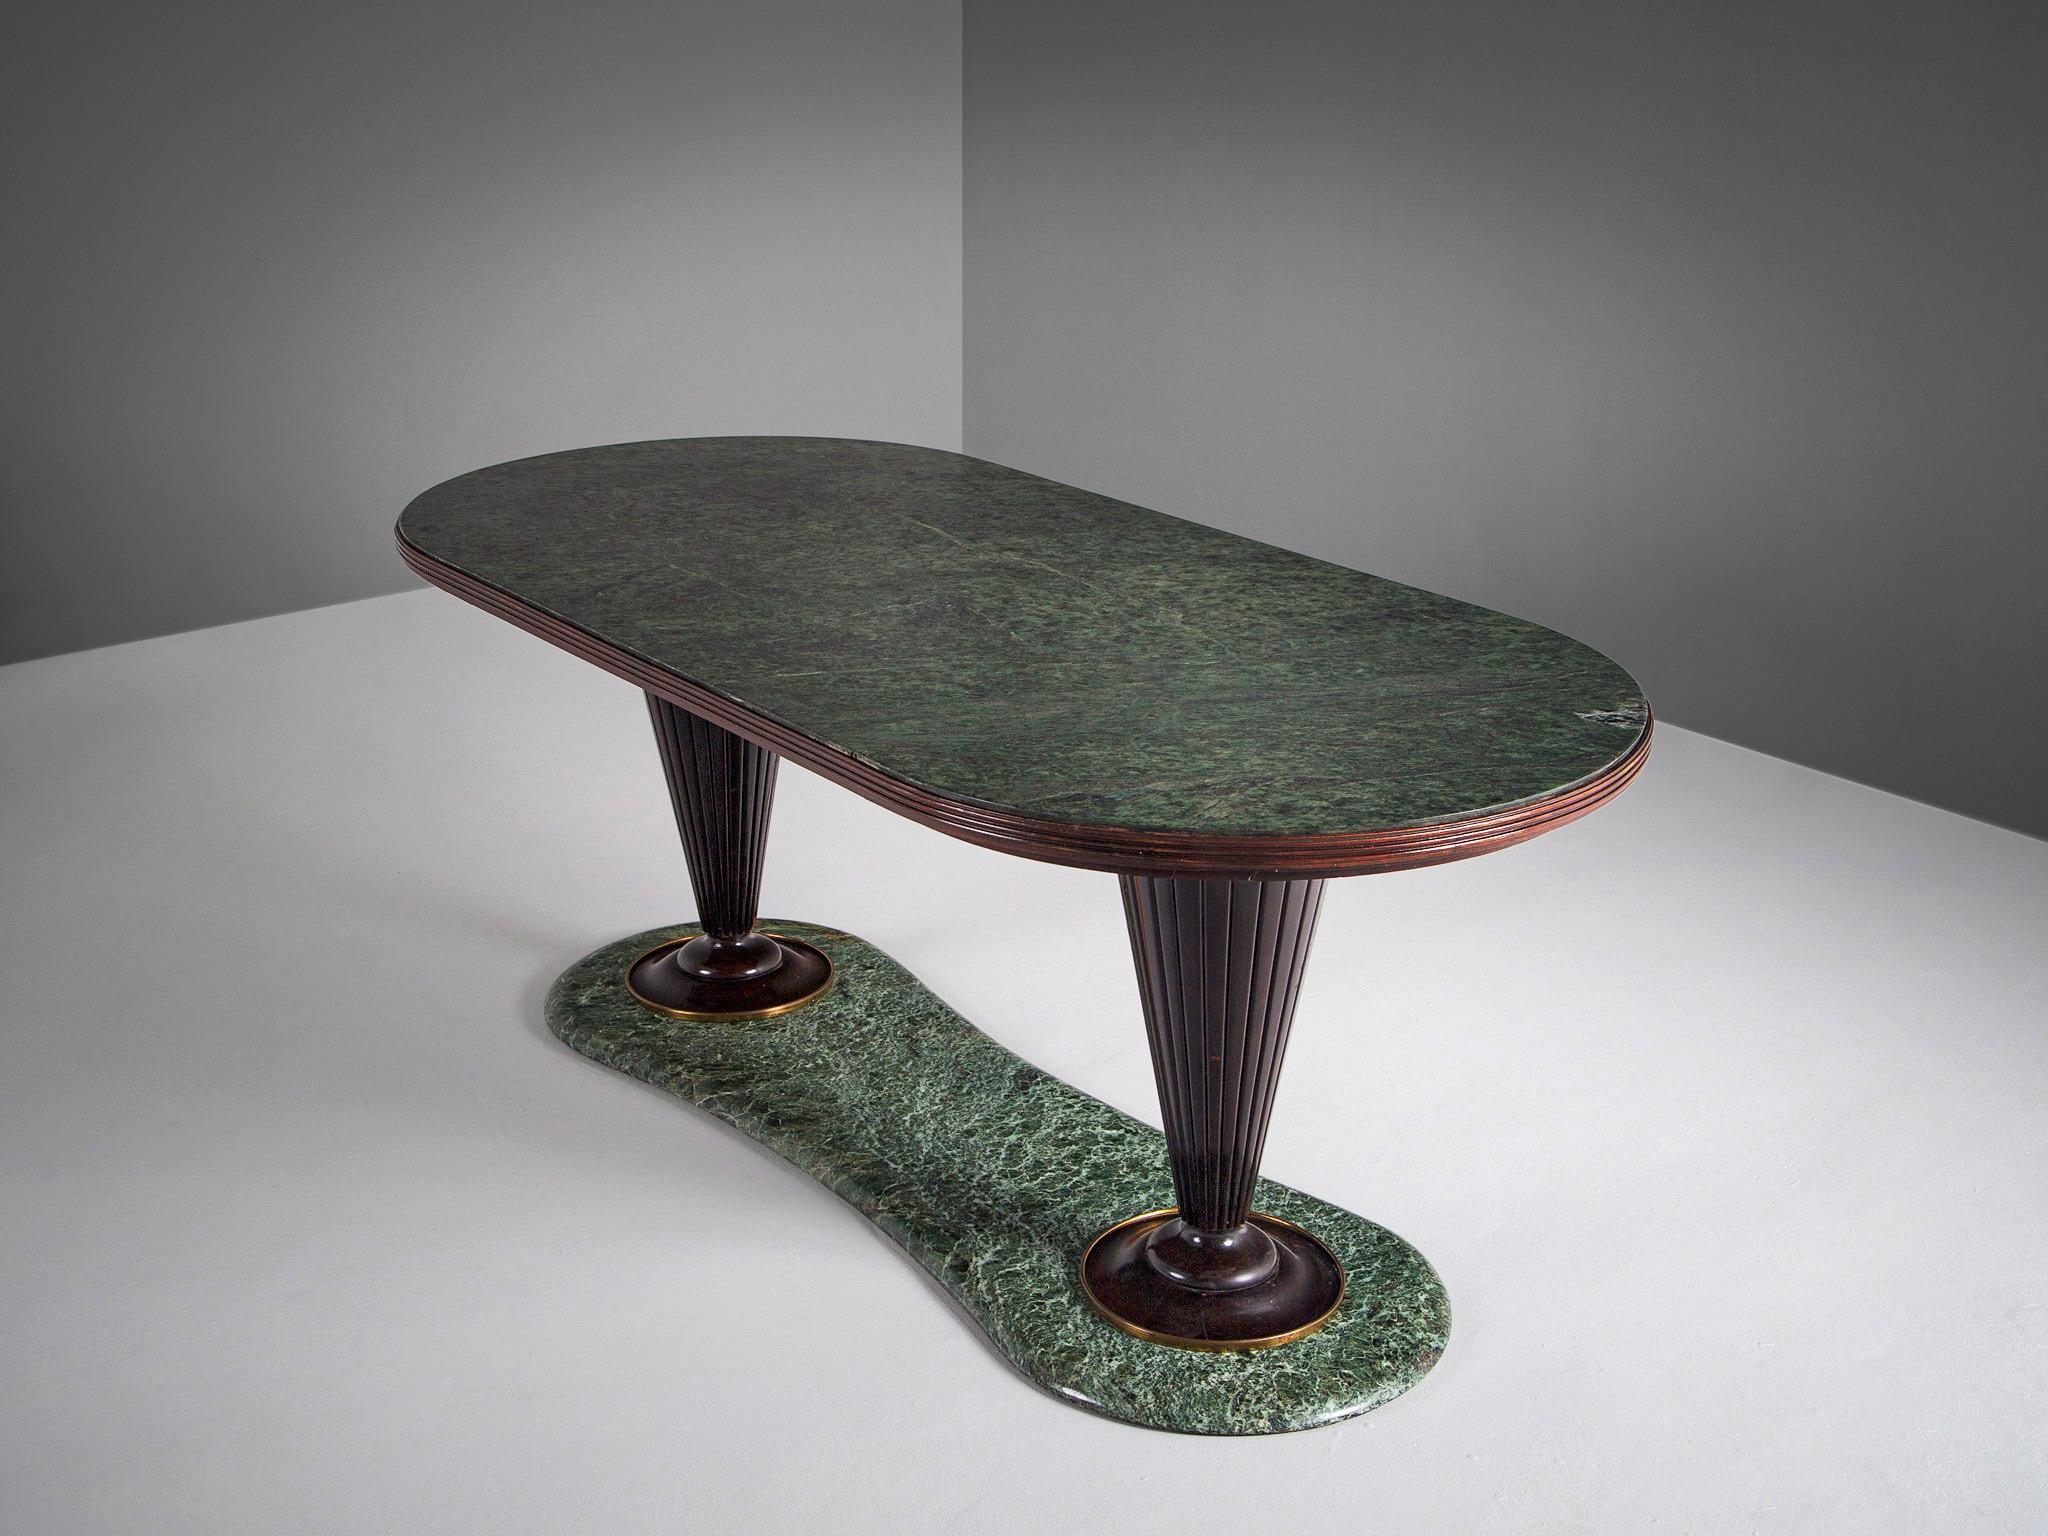 Vittorio Dassi, able, in marble, wood and brass, Italy, 1950s.

Elegant dining or centre table by Vittorio Dassi with an Alpi Verdi marble top and base, which matches perfectly with the elegant designed tapered legs. The stunning woodwork, brass